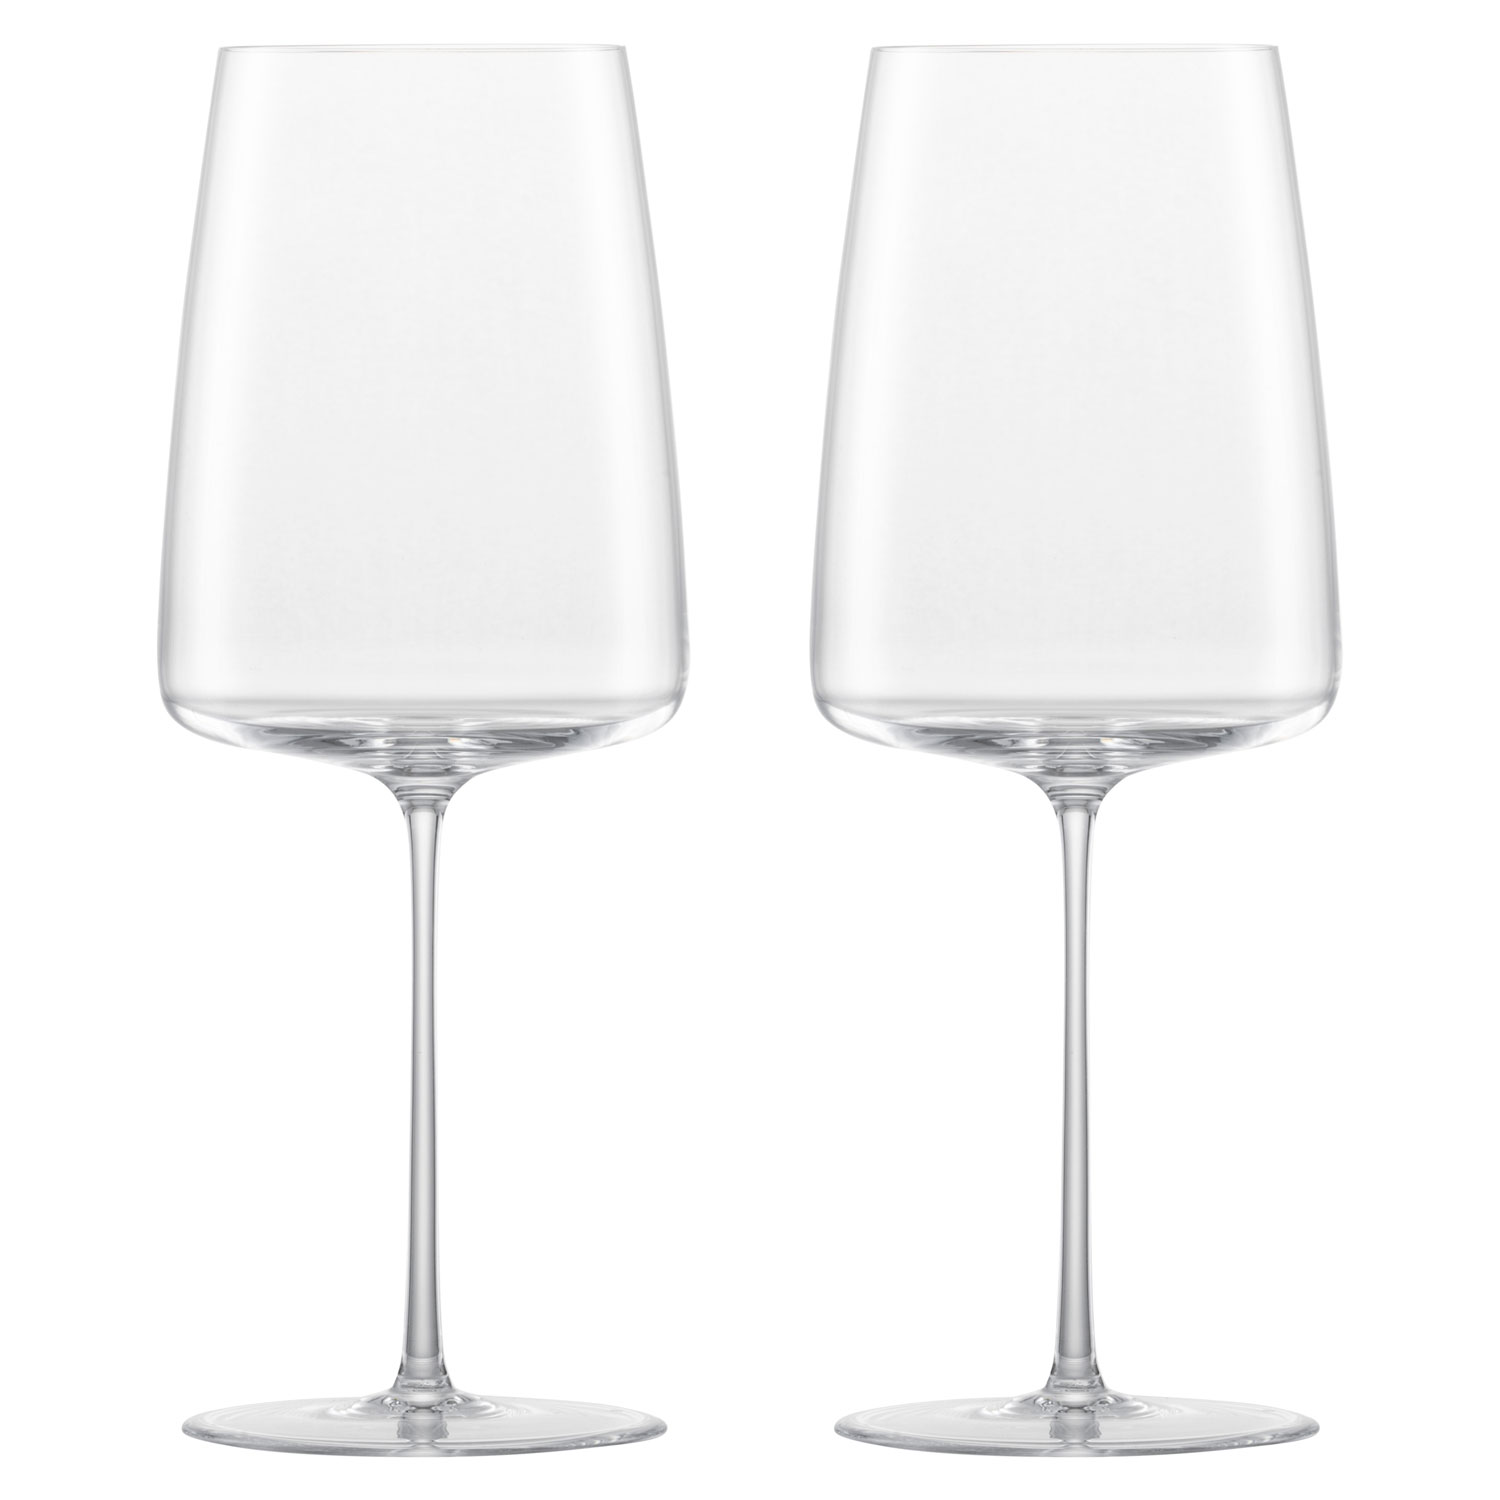 https://api-prod.royaldesign.se/api/products/image/11/zwiesel-simplify-fruity-delicate-wine-glass-55-cl-2-pack-0